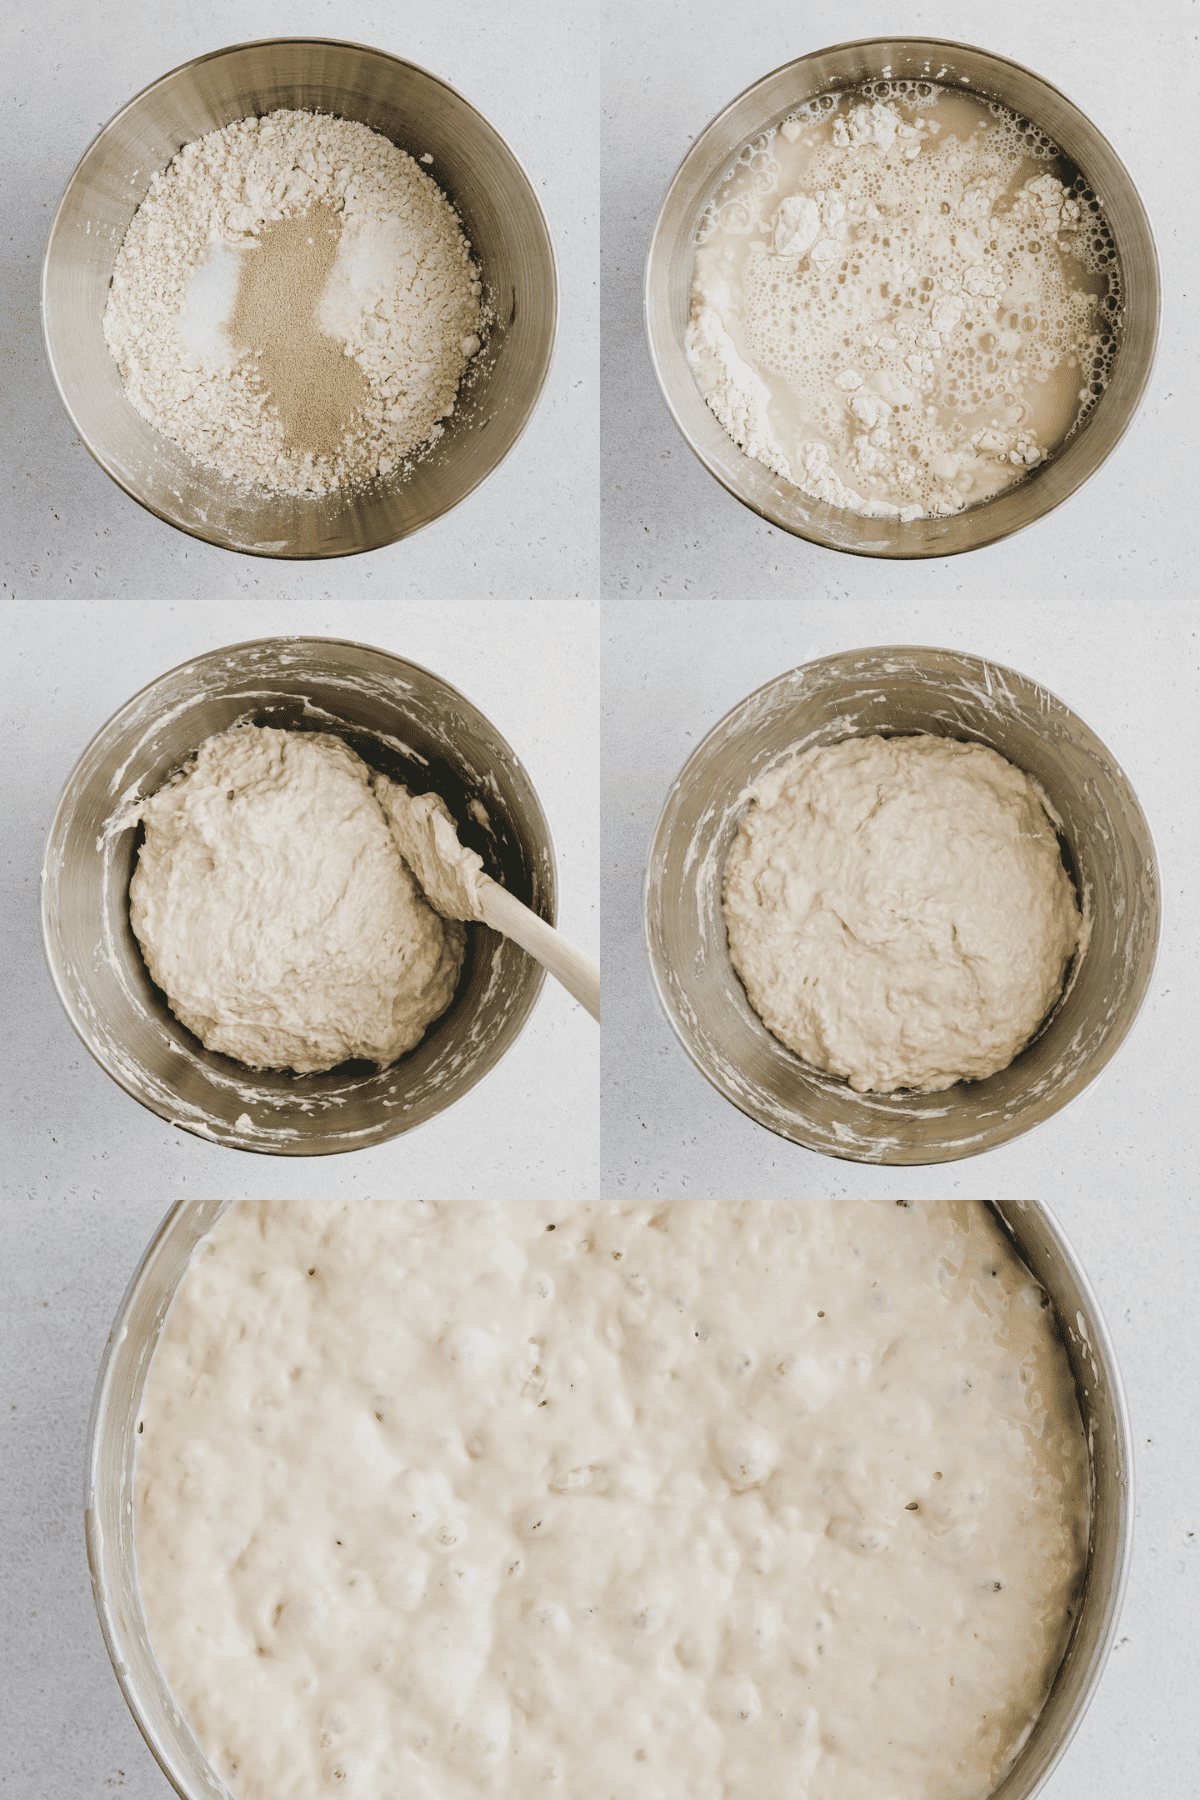 Gallery of 5 images, all top view of a metal mixing bowl showing the process of making focaccia dough and what it looks like having risen. 